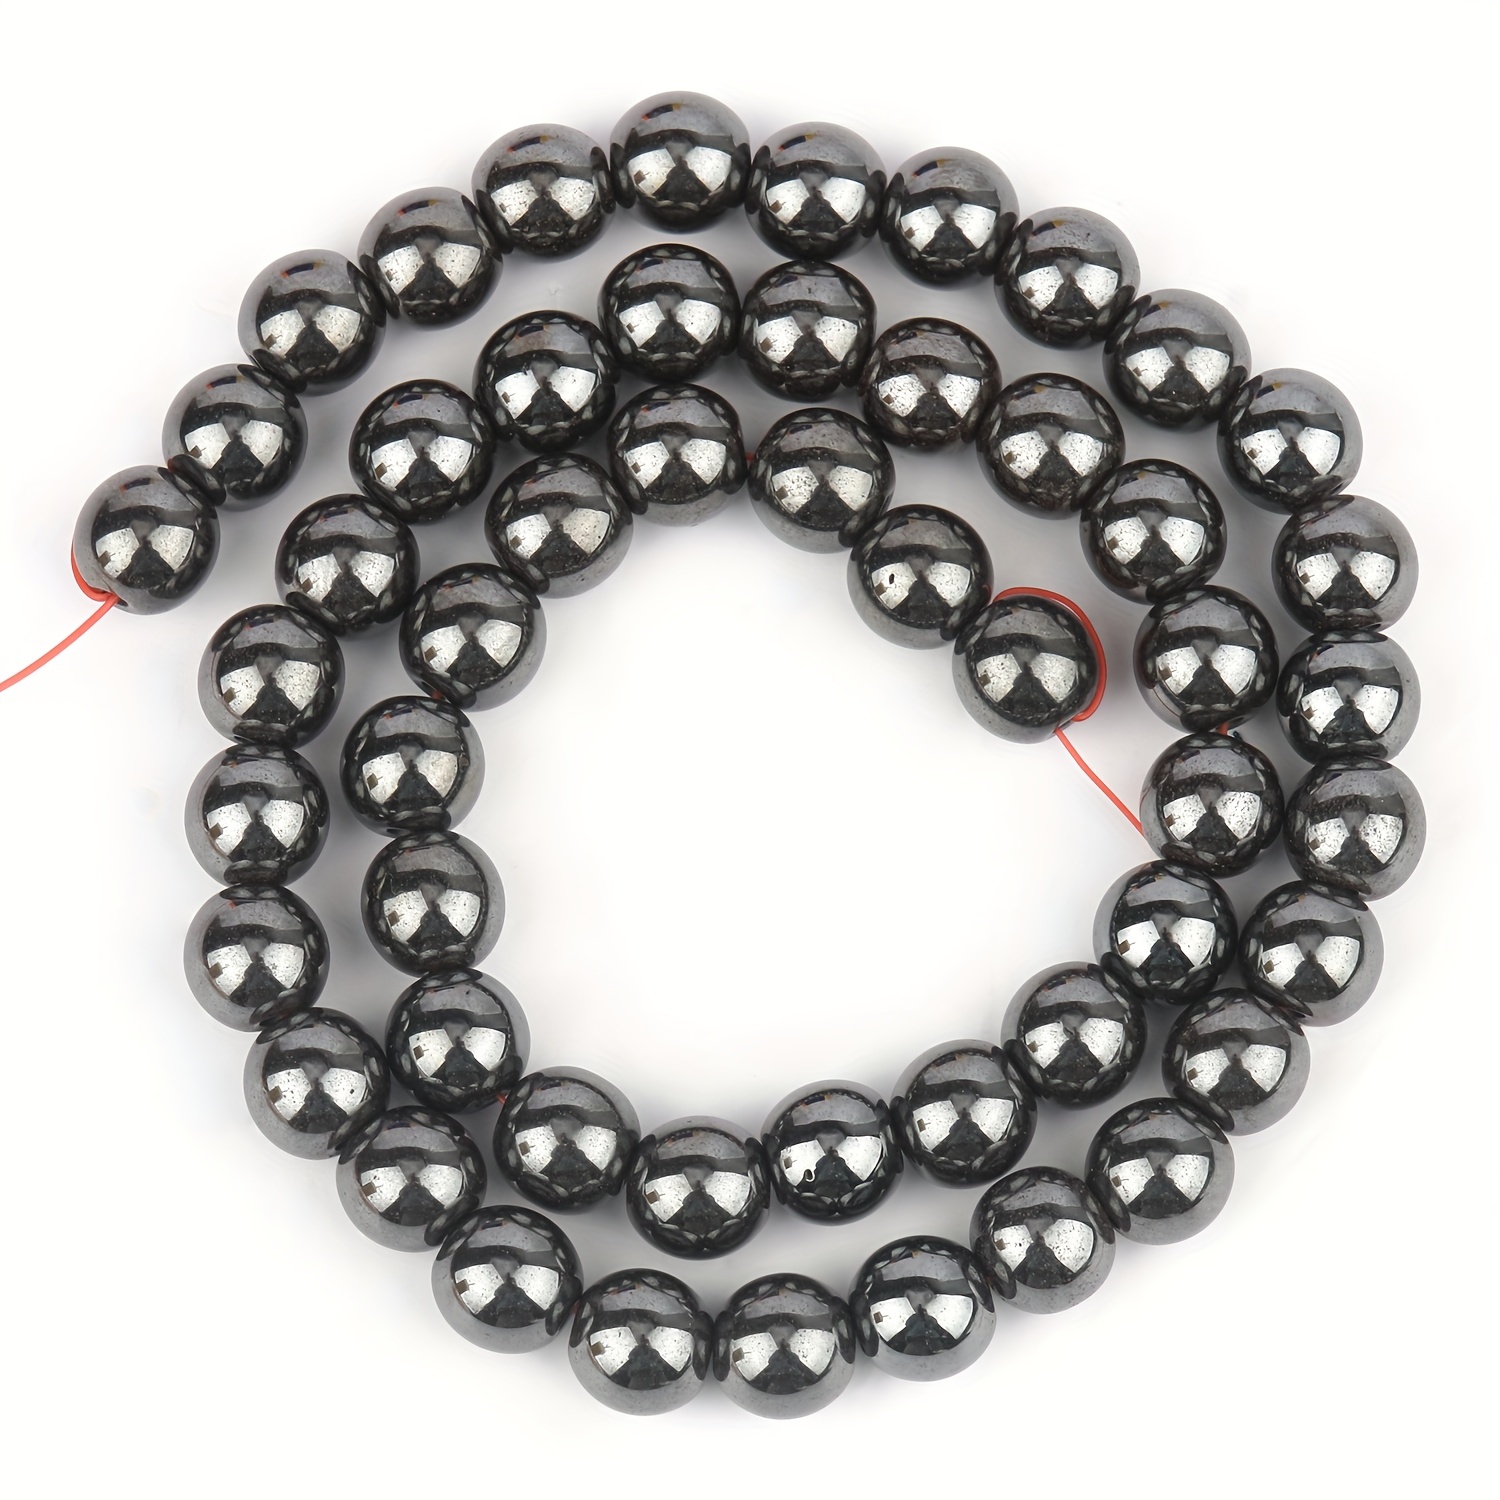 1 Strand Smooth Black Hematite Beads for Bracelet for Jewelry Making  Supplies